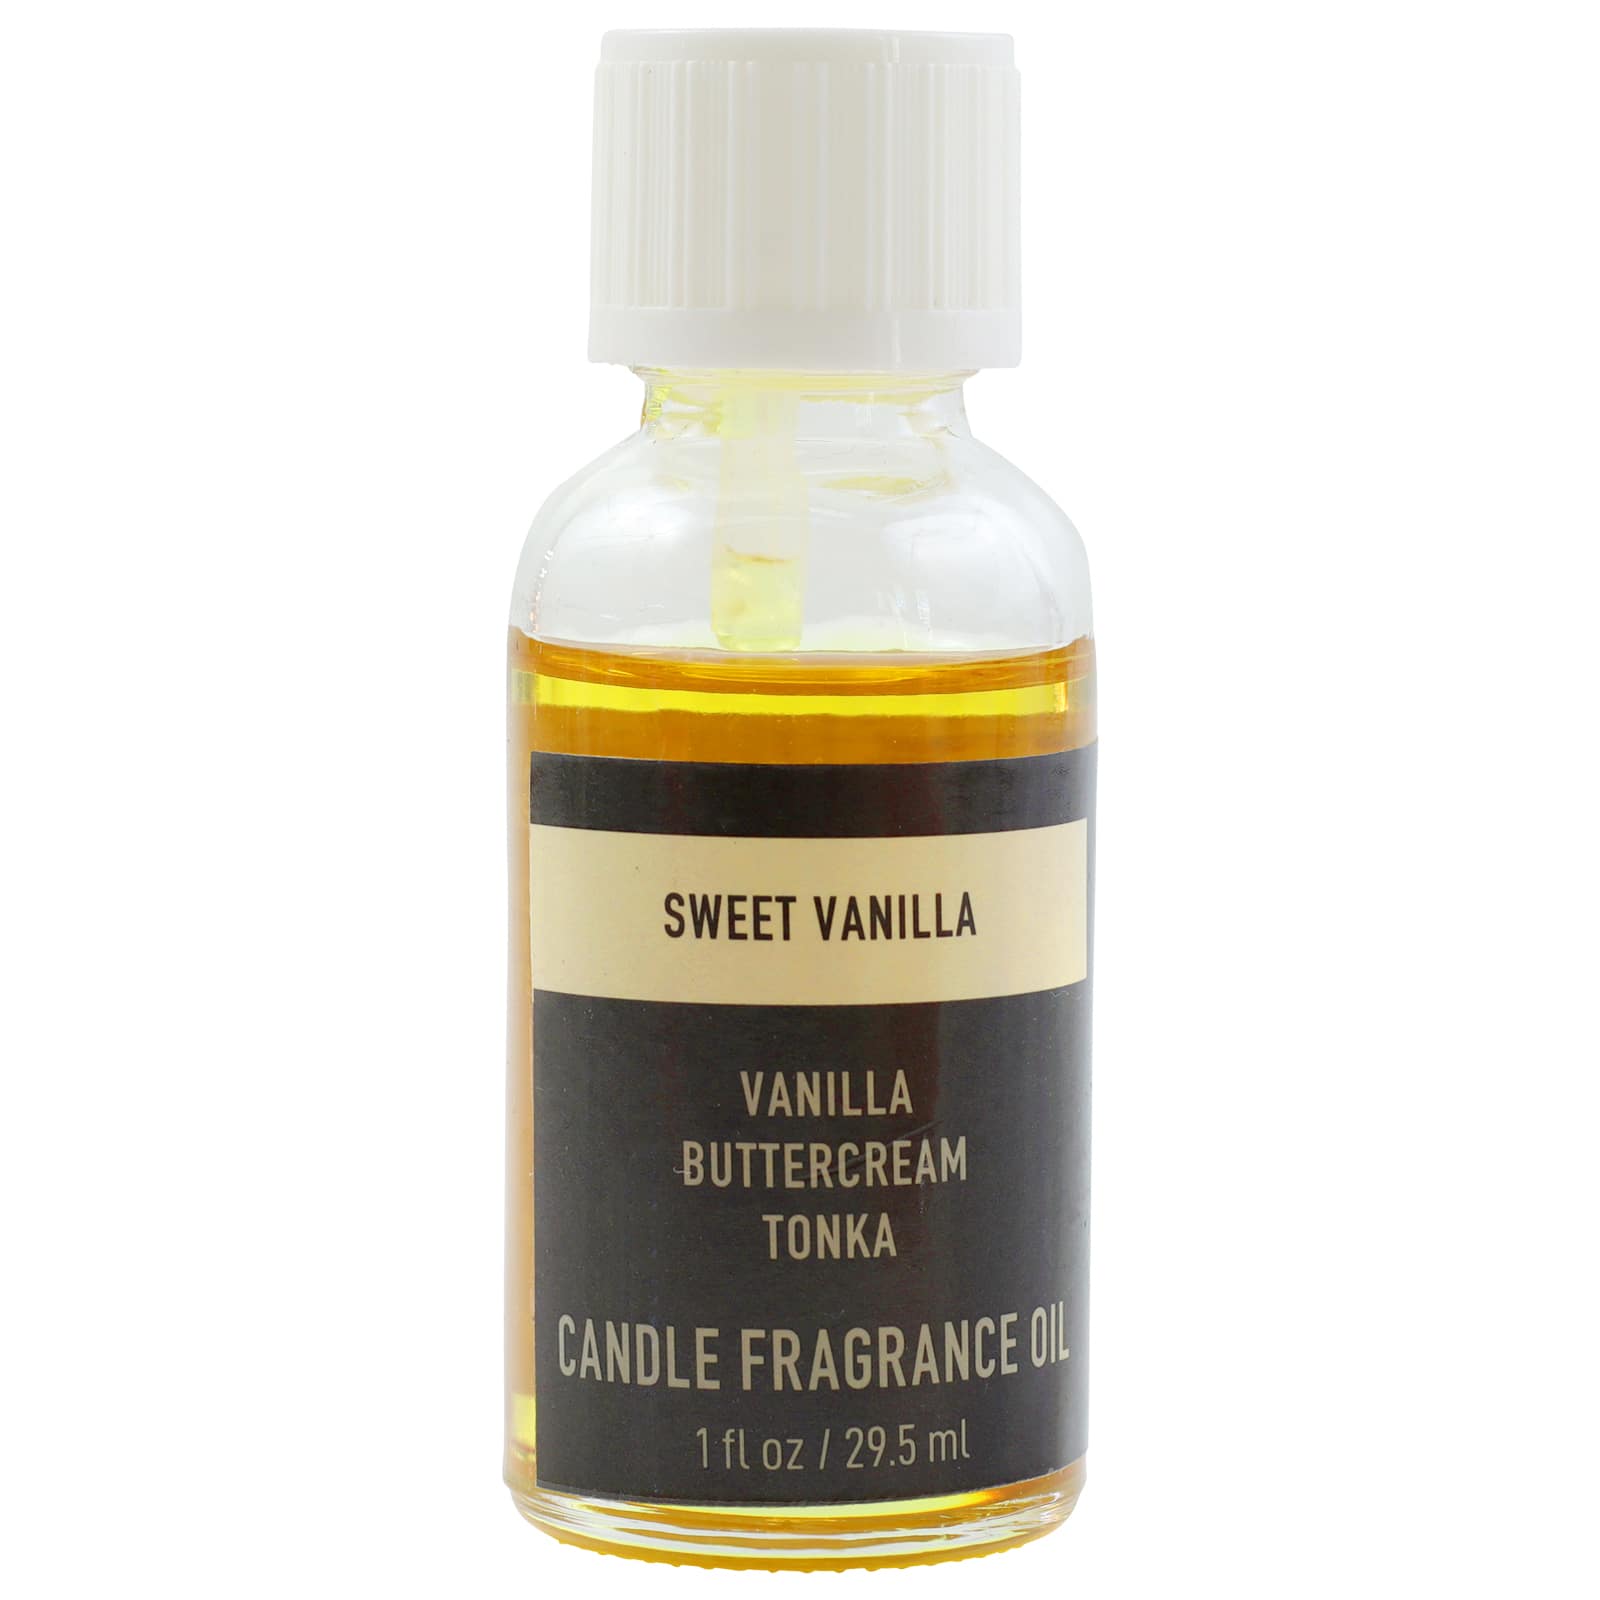 Sweet Vanilla Candle Fragrance Oil by Make Market®